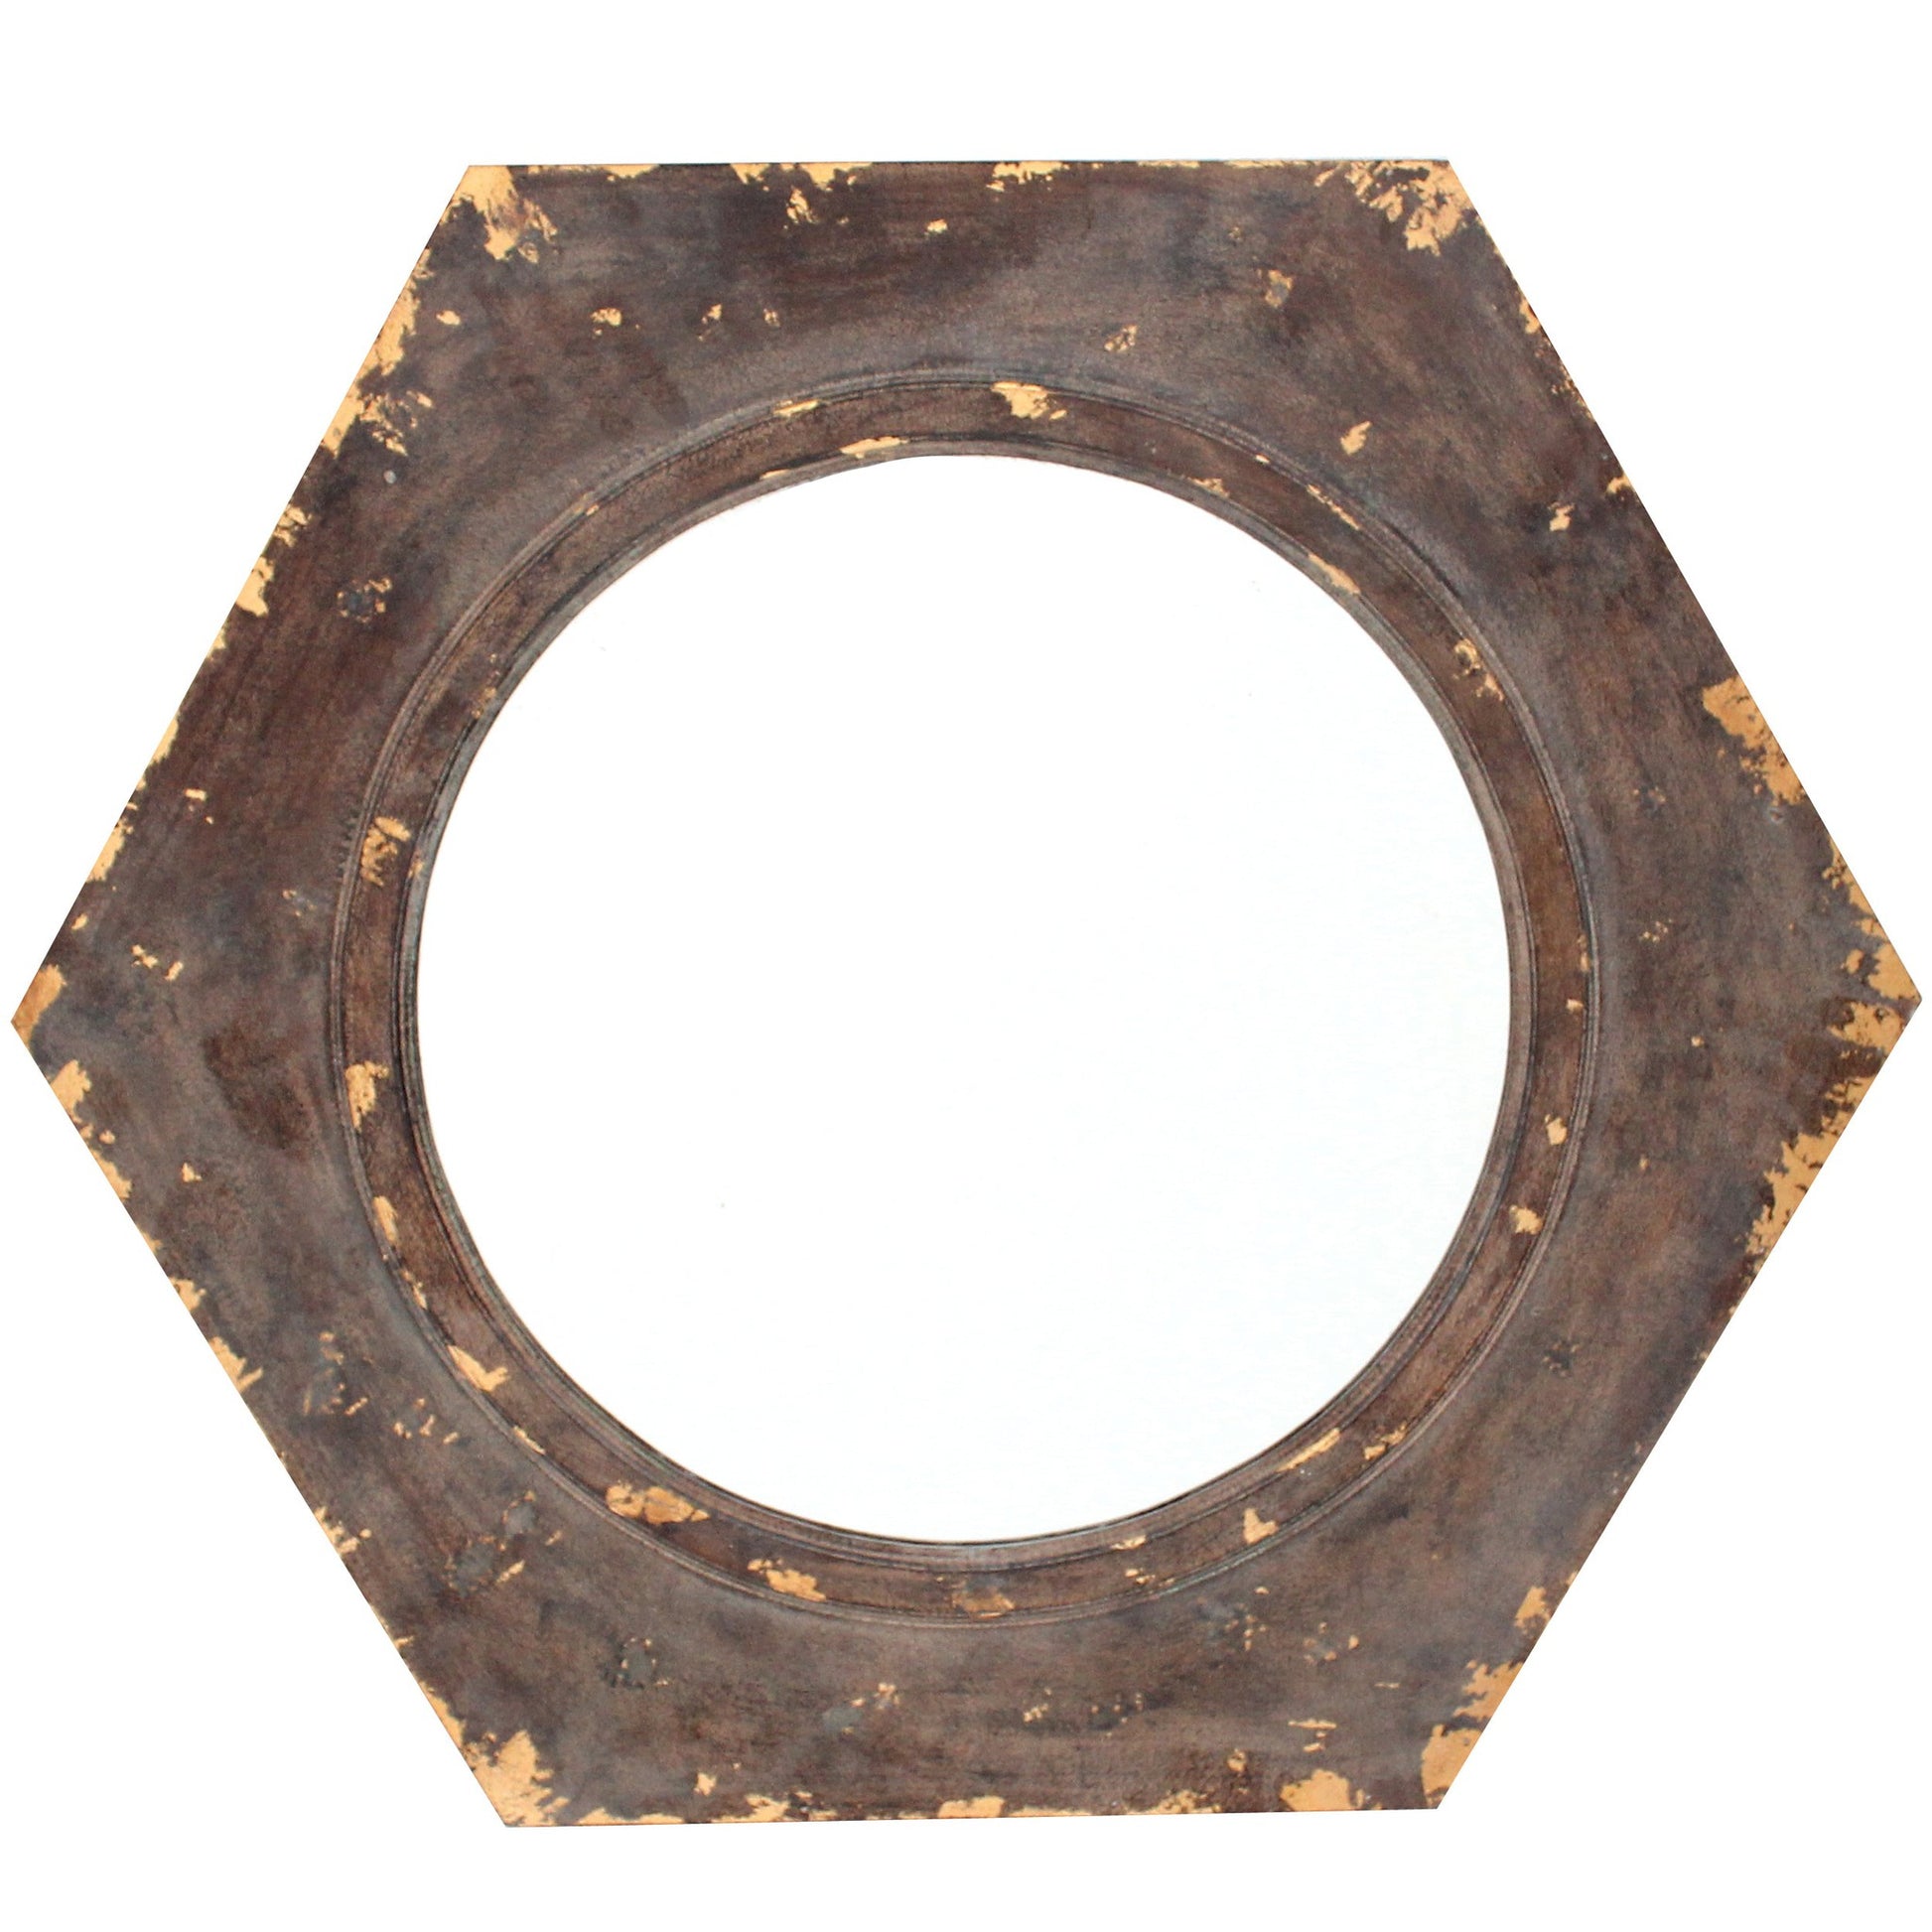 Benzara 27" Silver and Brown Rustic Style Wooden Wall Mirror With Hexagonal Frame